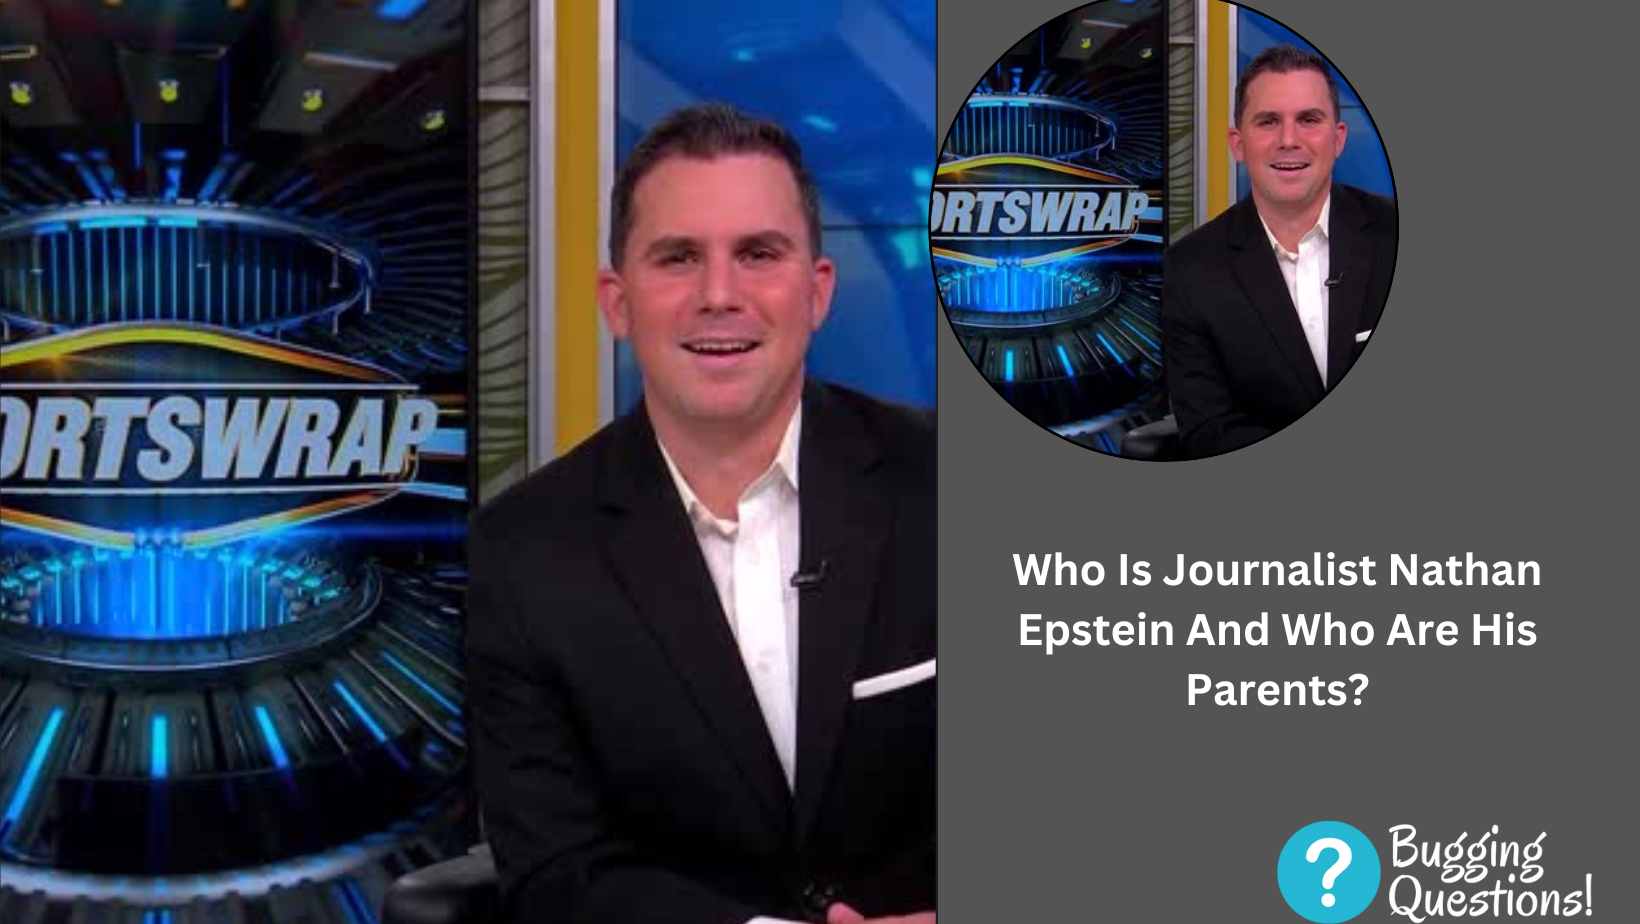 Who Is Journalist Nathan Epstein And Who Are His Parents?